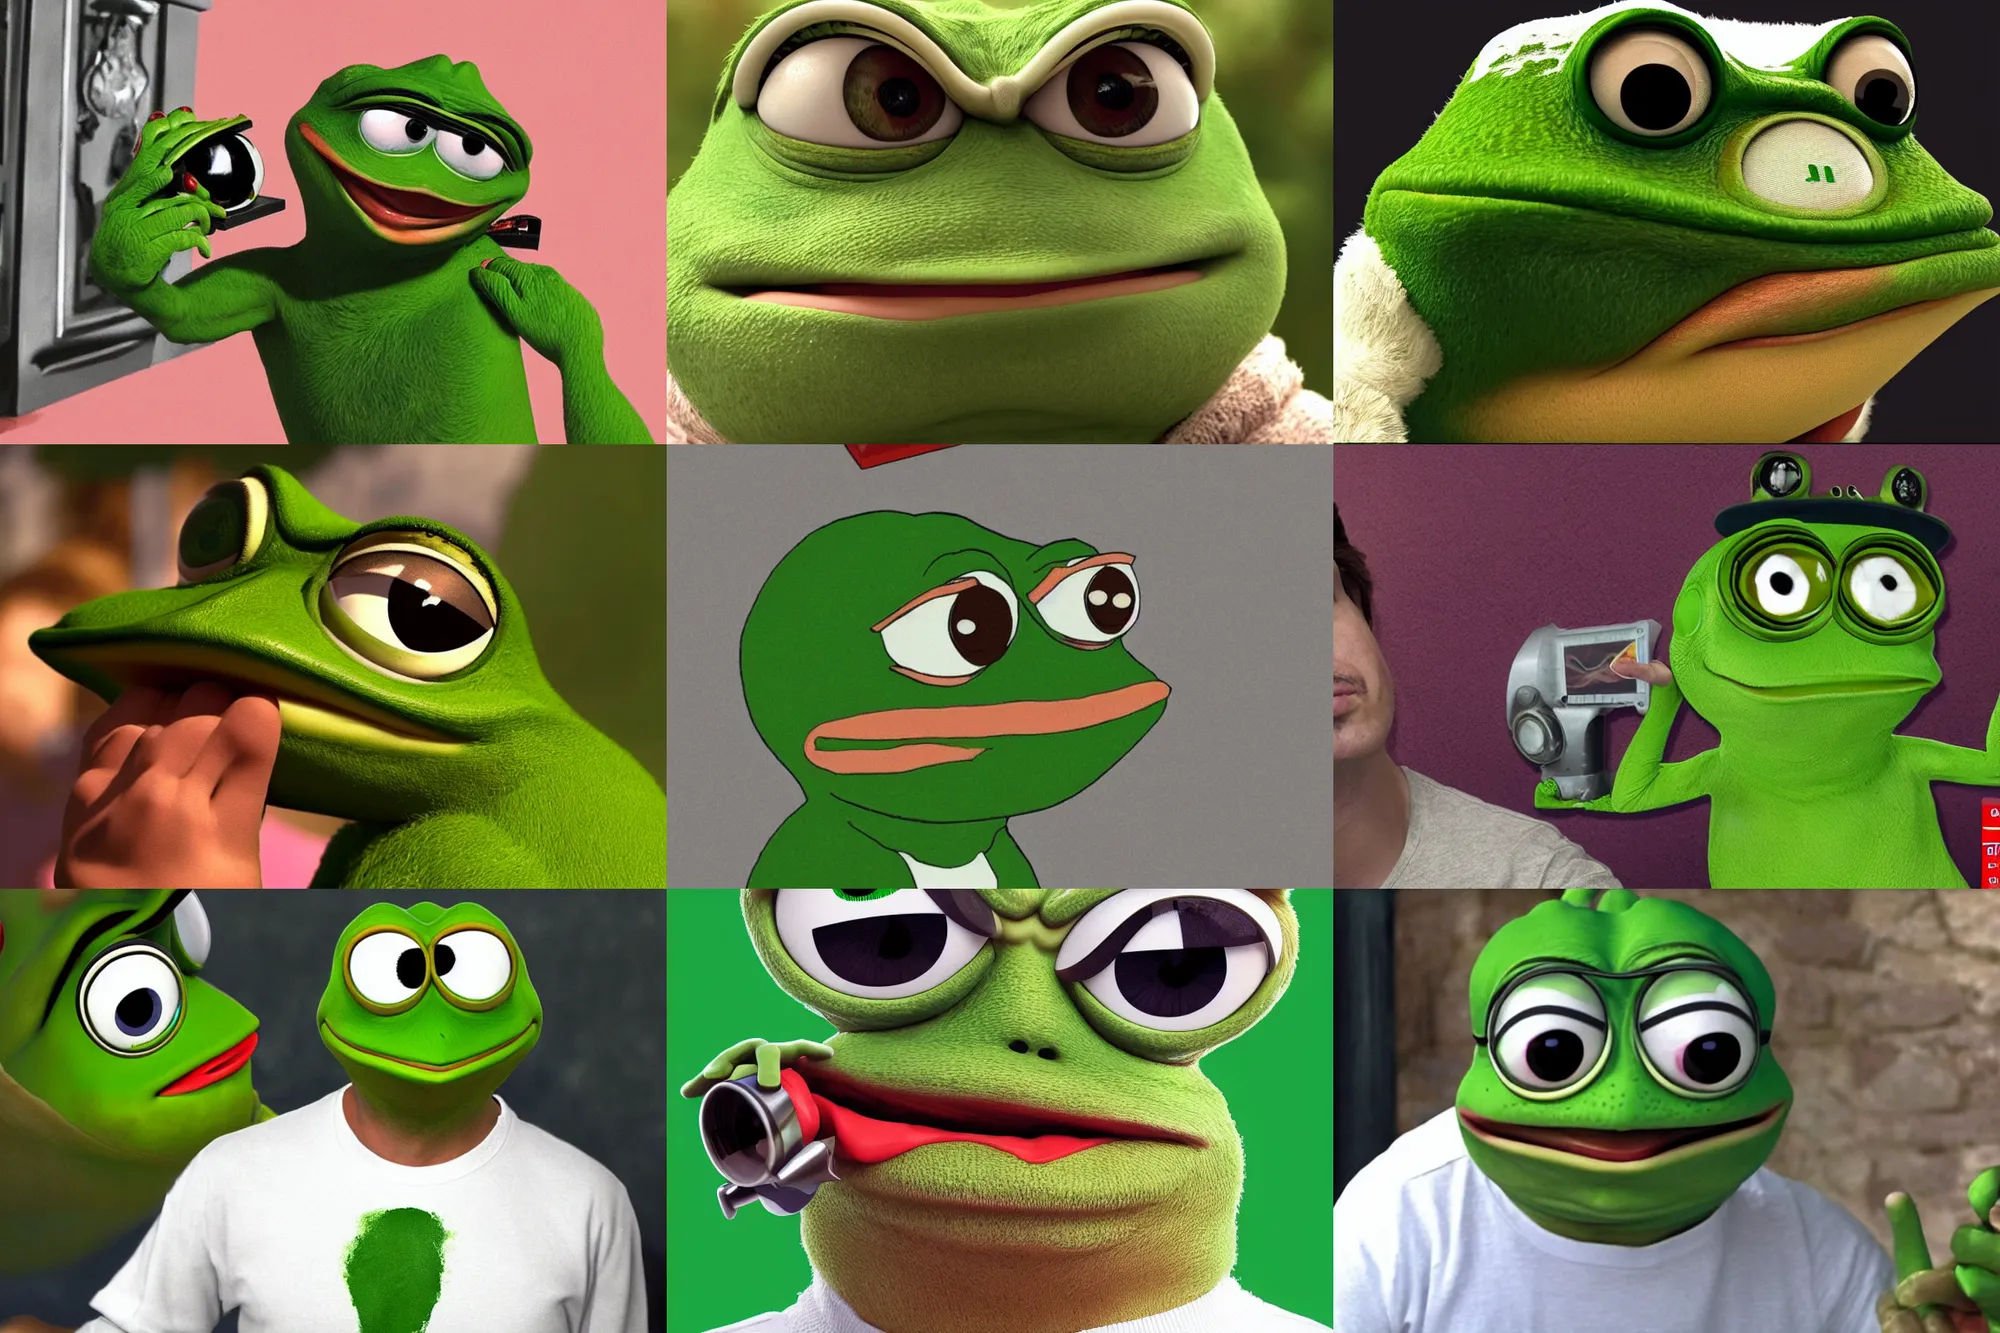 Pepe the Frog (played by András Arató) cringing, | Stable Diffusion ...